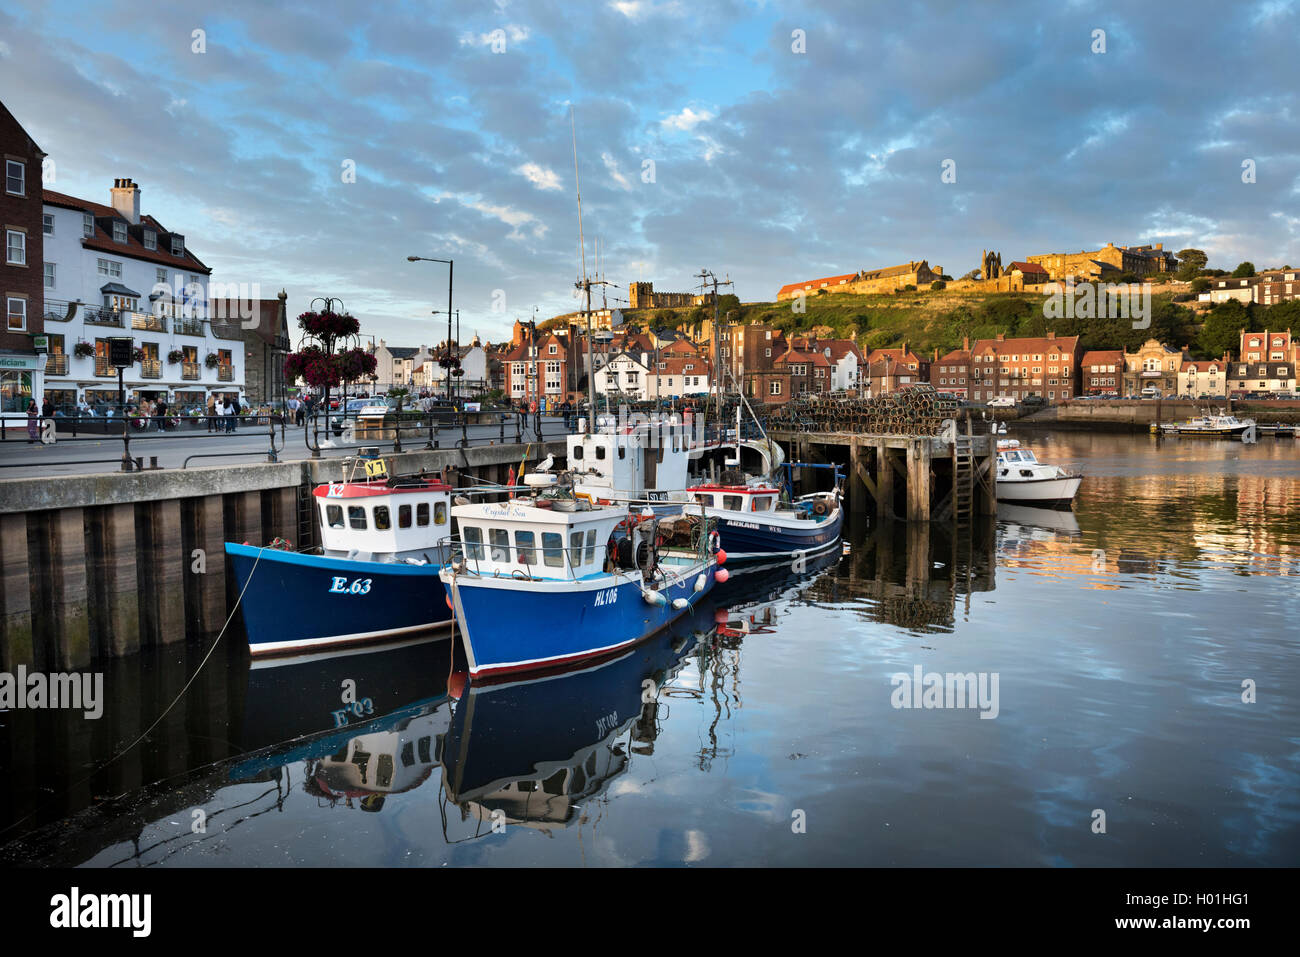 The harbour, Whitby, North Yorkshire, UK. The Abbey and St Mary's Chuch are seen on the cliff top above. Stock Photo